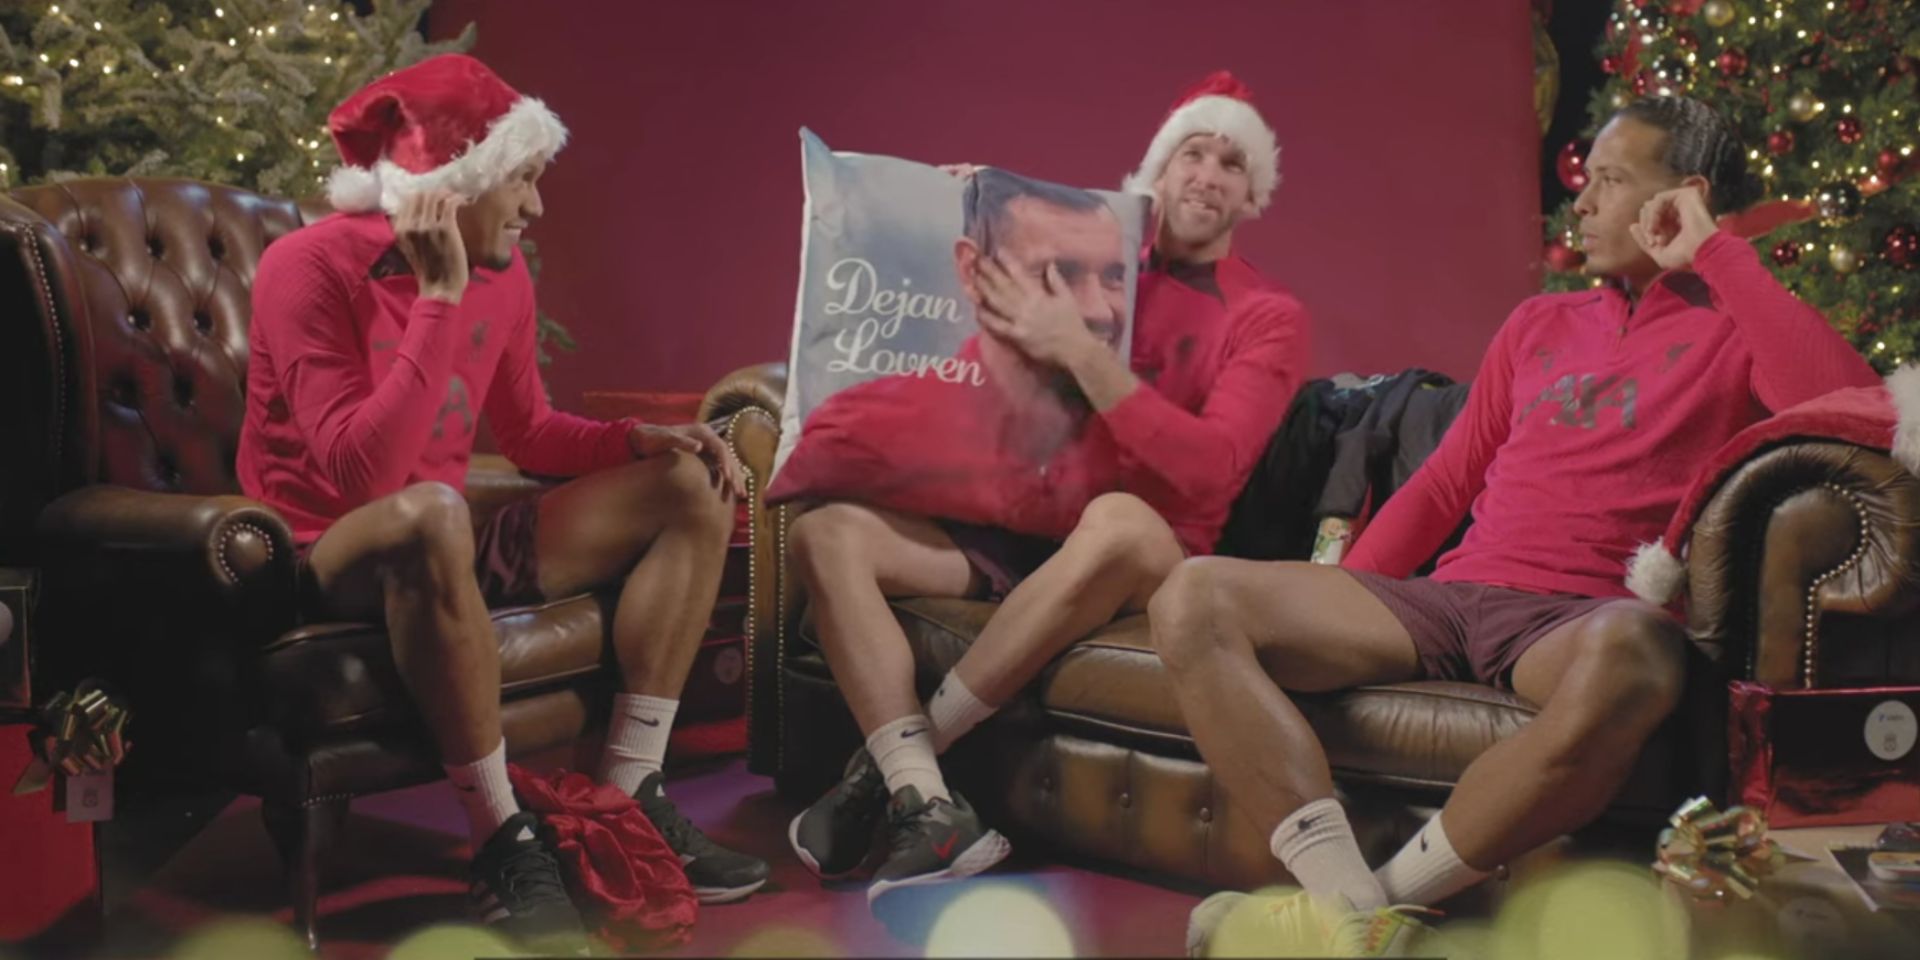 (Video) “I wouldn’t be happy if I got this” – van Dijk on the personalised Lovren cushion